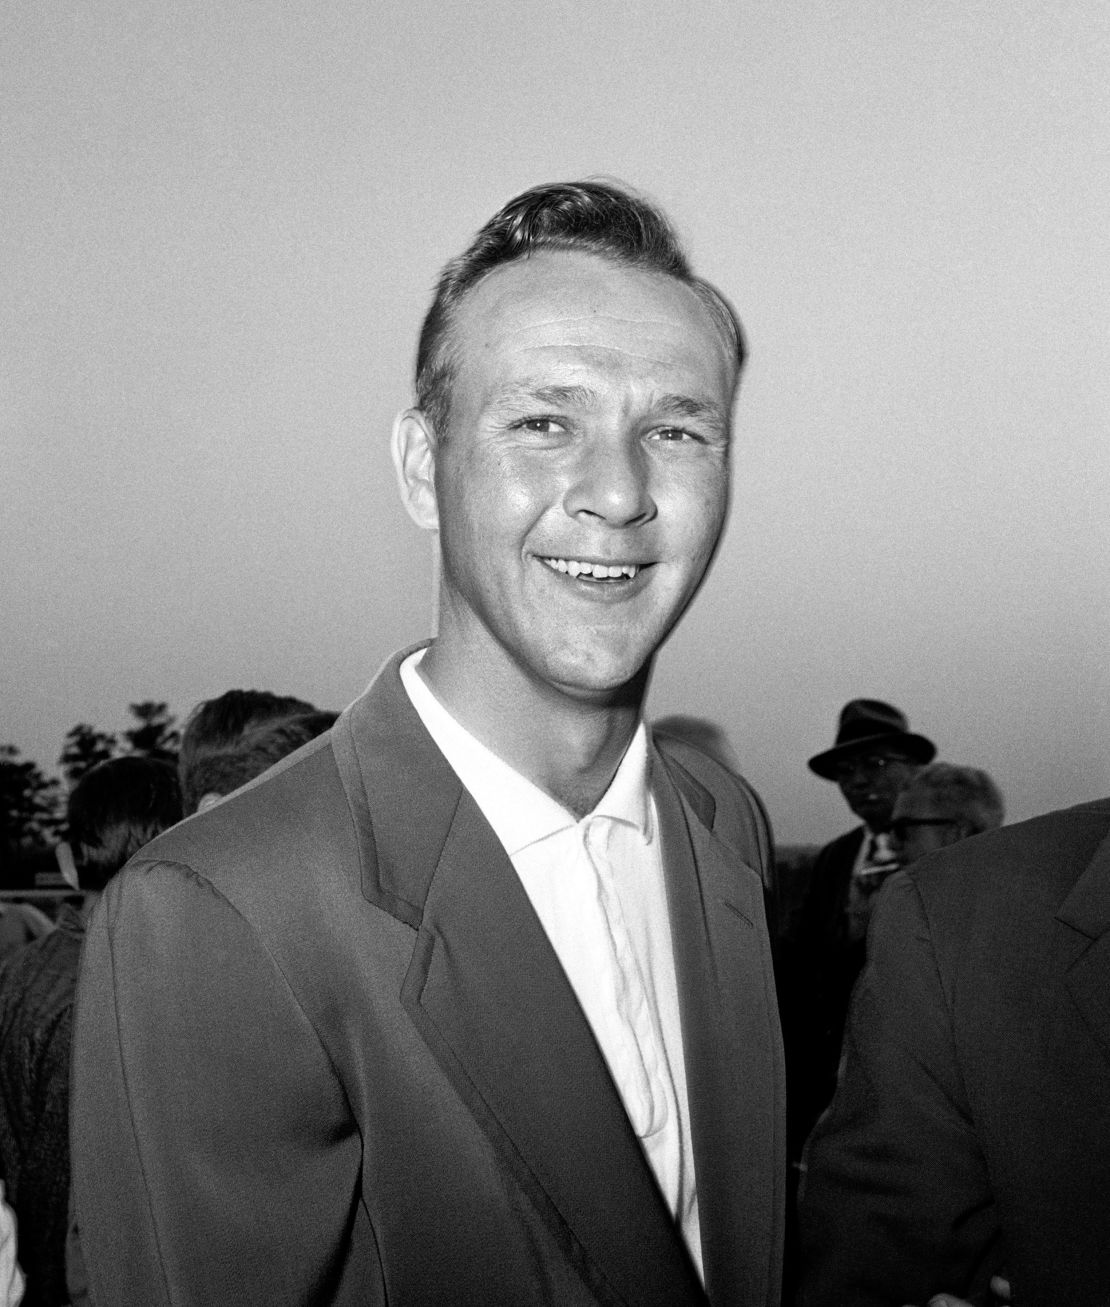 Palmer smiles during the presentation ceremony at the 1958 Masters tournament.